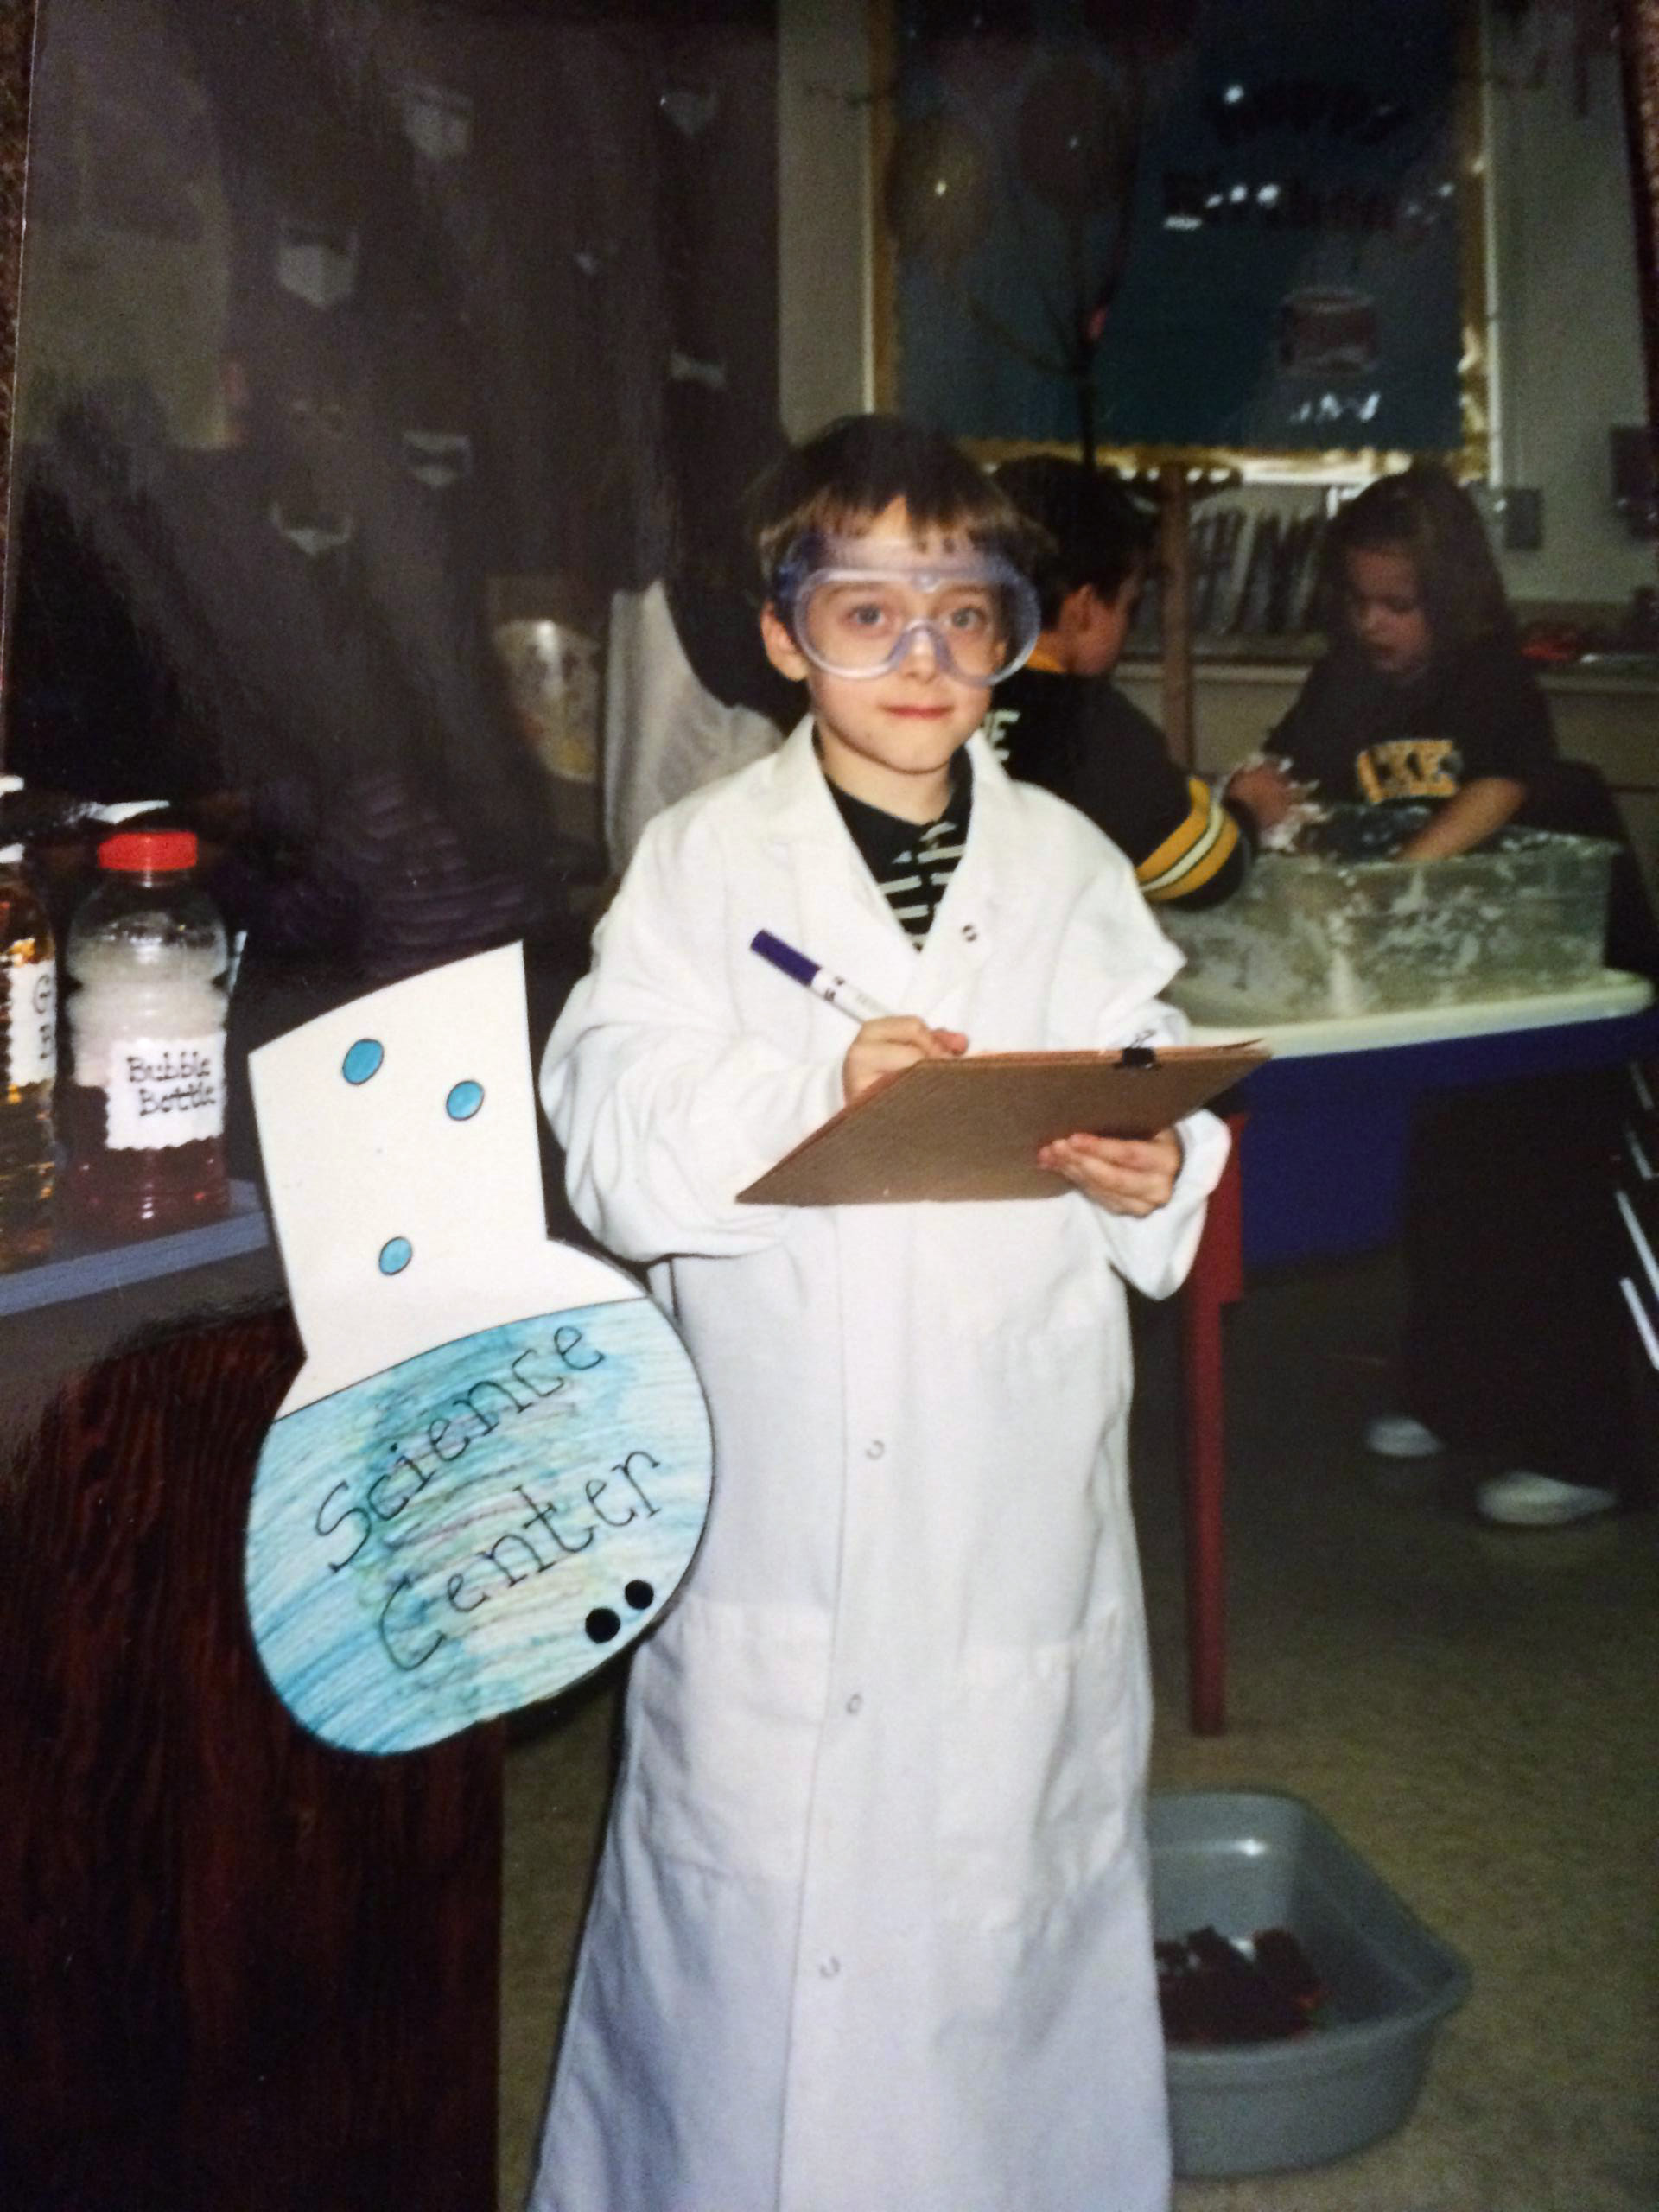 Elementary school student in lab coat and protective goggles, holding clipboard.